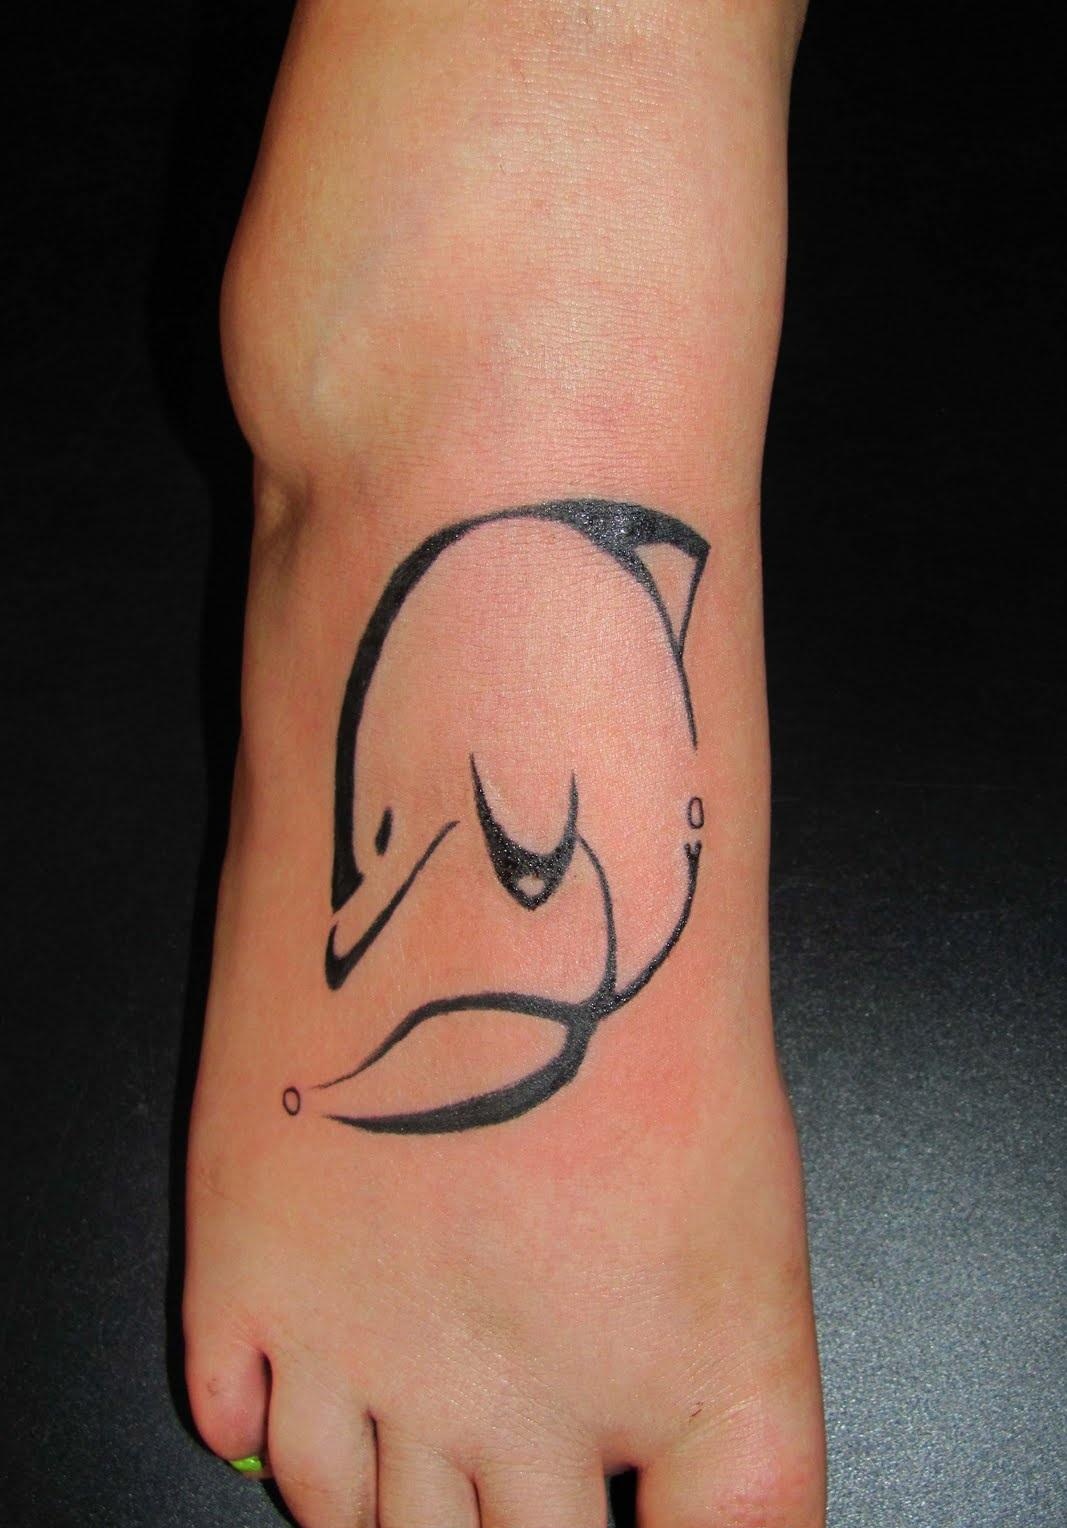 Dolphin Tattoos Designs, Ideas and Meaning | Tattoos For You